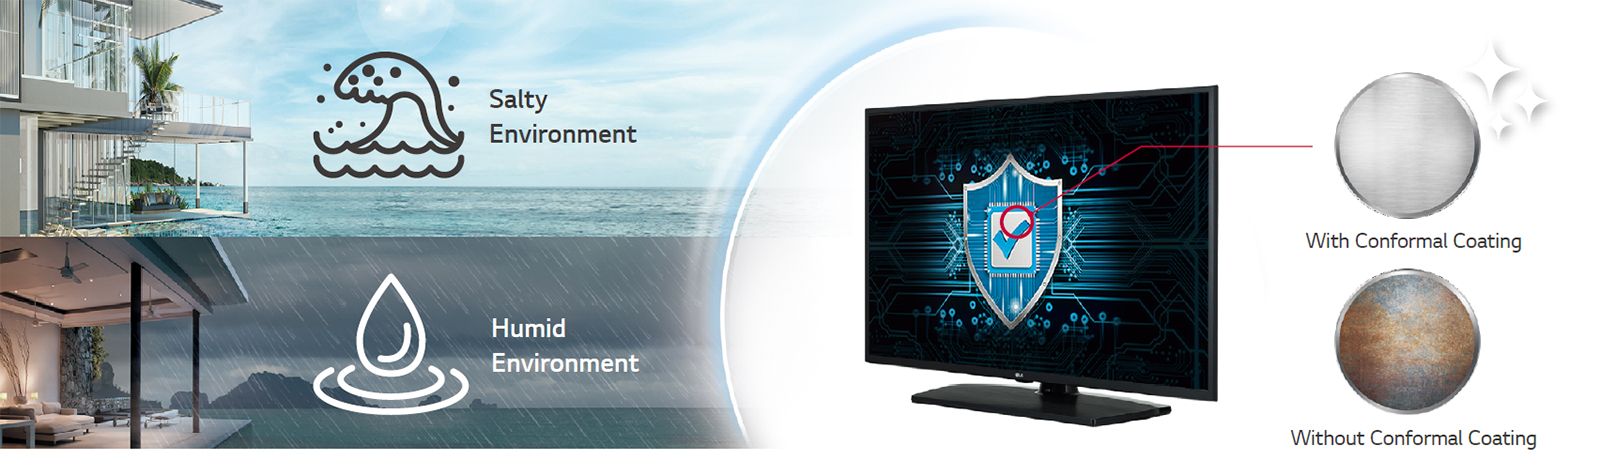 LG TVs in hotels or resorts 